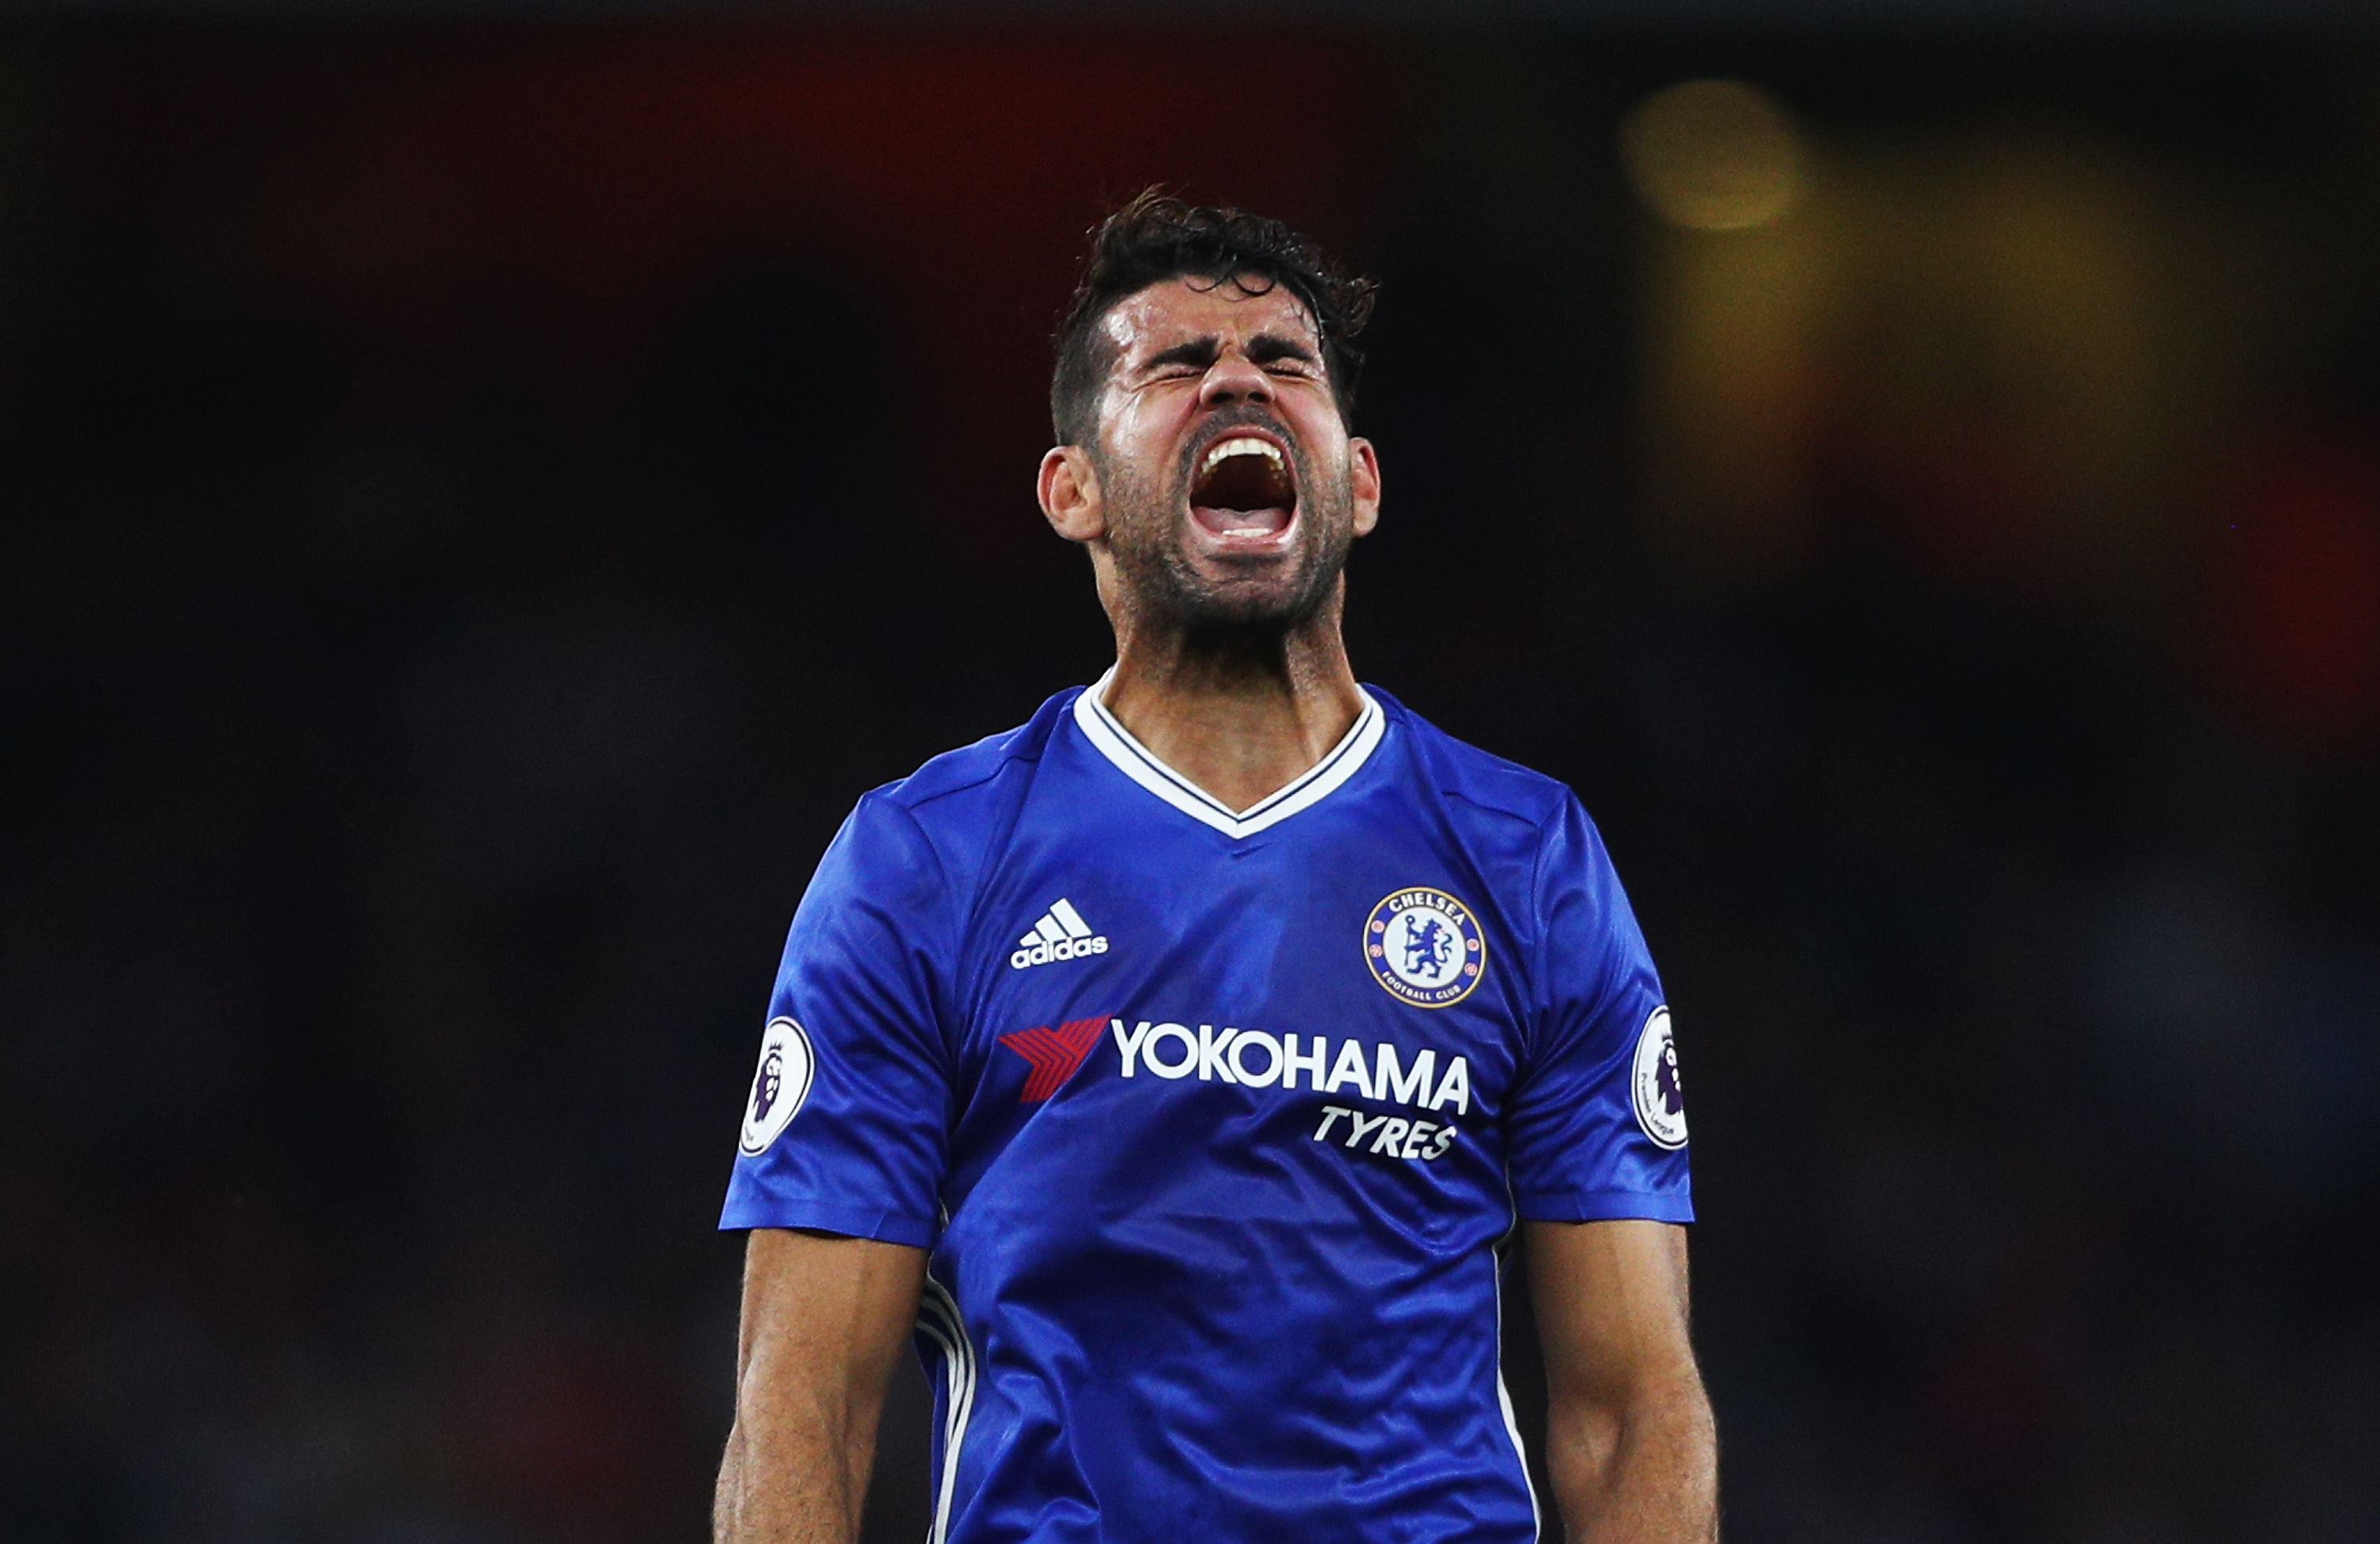 LONDON, ENGLAND - SEPTEMBER 24:  Diego Costa of Chelsea shows his frustration during the Premier League match between Arsenal and Chelsea at the Emirates Stadium on September 24, 2016 in London, England.  (Photo by Paul Gilham/Getty Images)